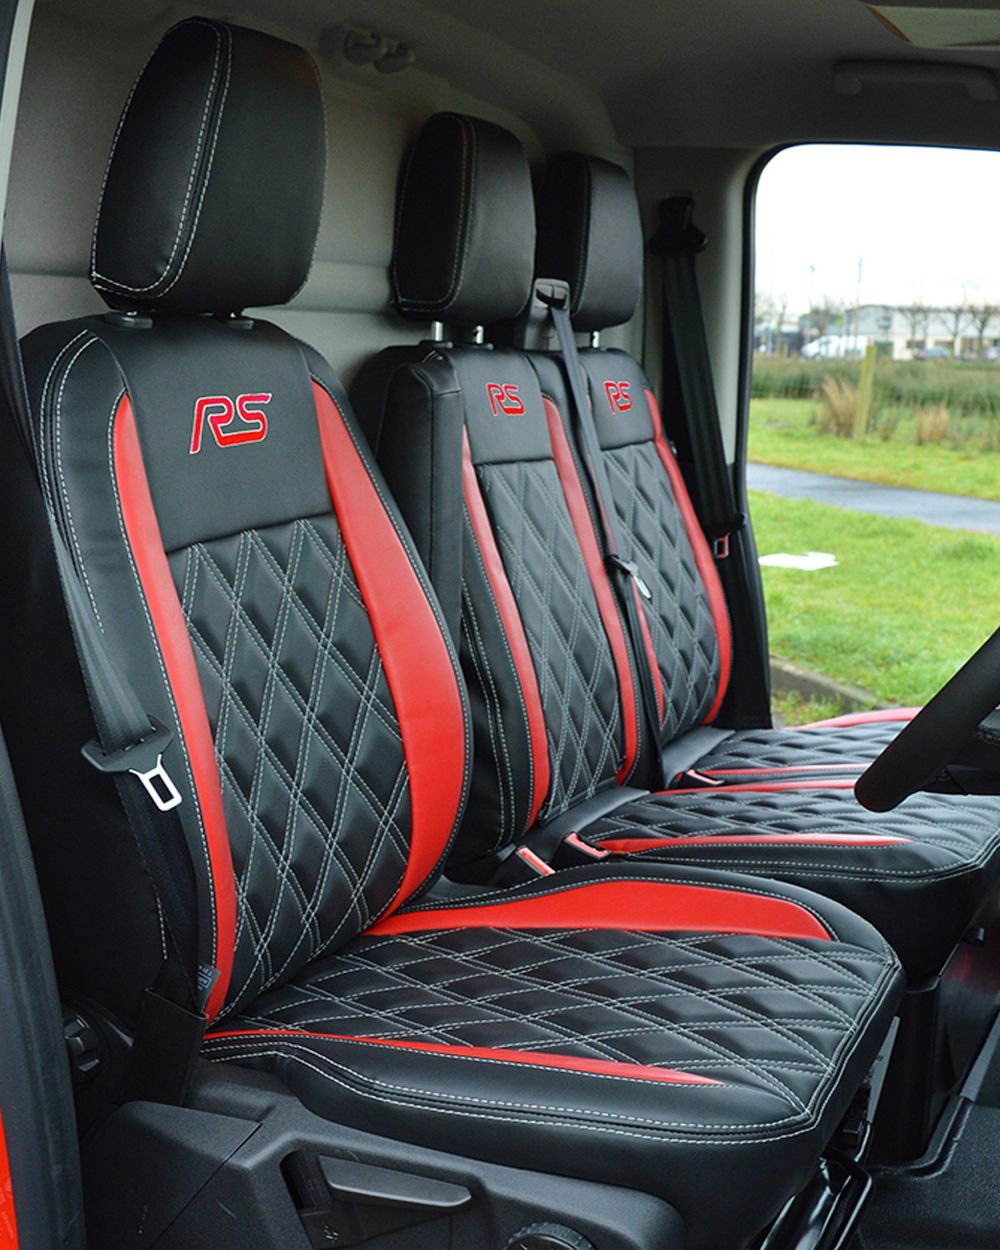 https://www.carseatcoversdirect.com/media/catalog/product/cache/6b9f2536fab850b9ae68673137c42213/f/o/ford_transit_red_rs_seat_covers.jpg